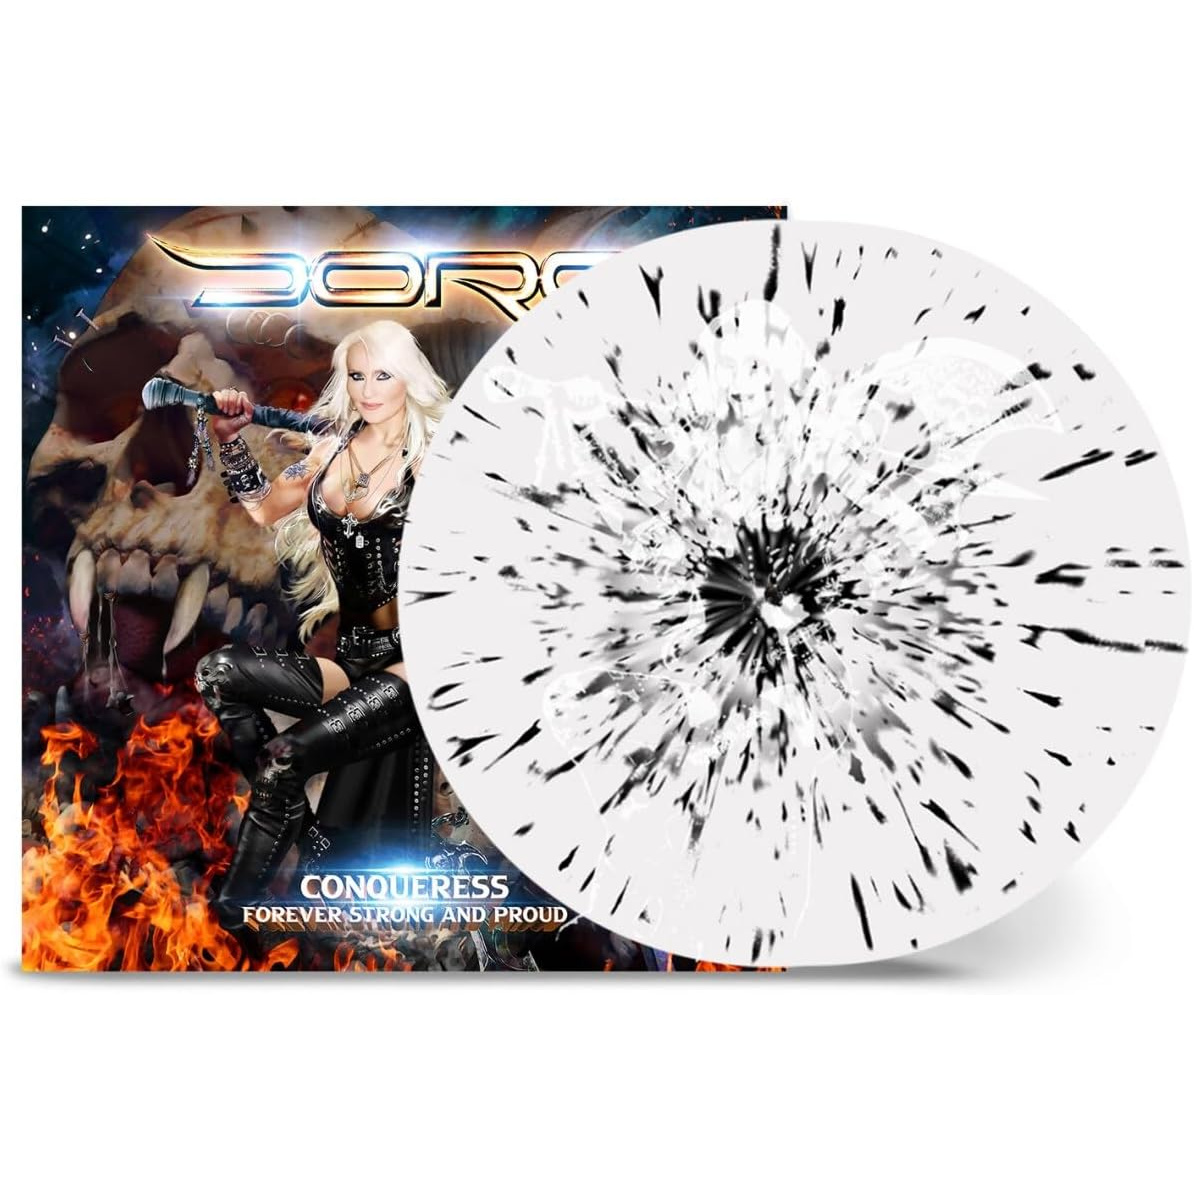 CONQUERESS - FOREVER STRONG AND PROUD (SPLATTER VINYL EDITION)